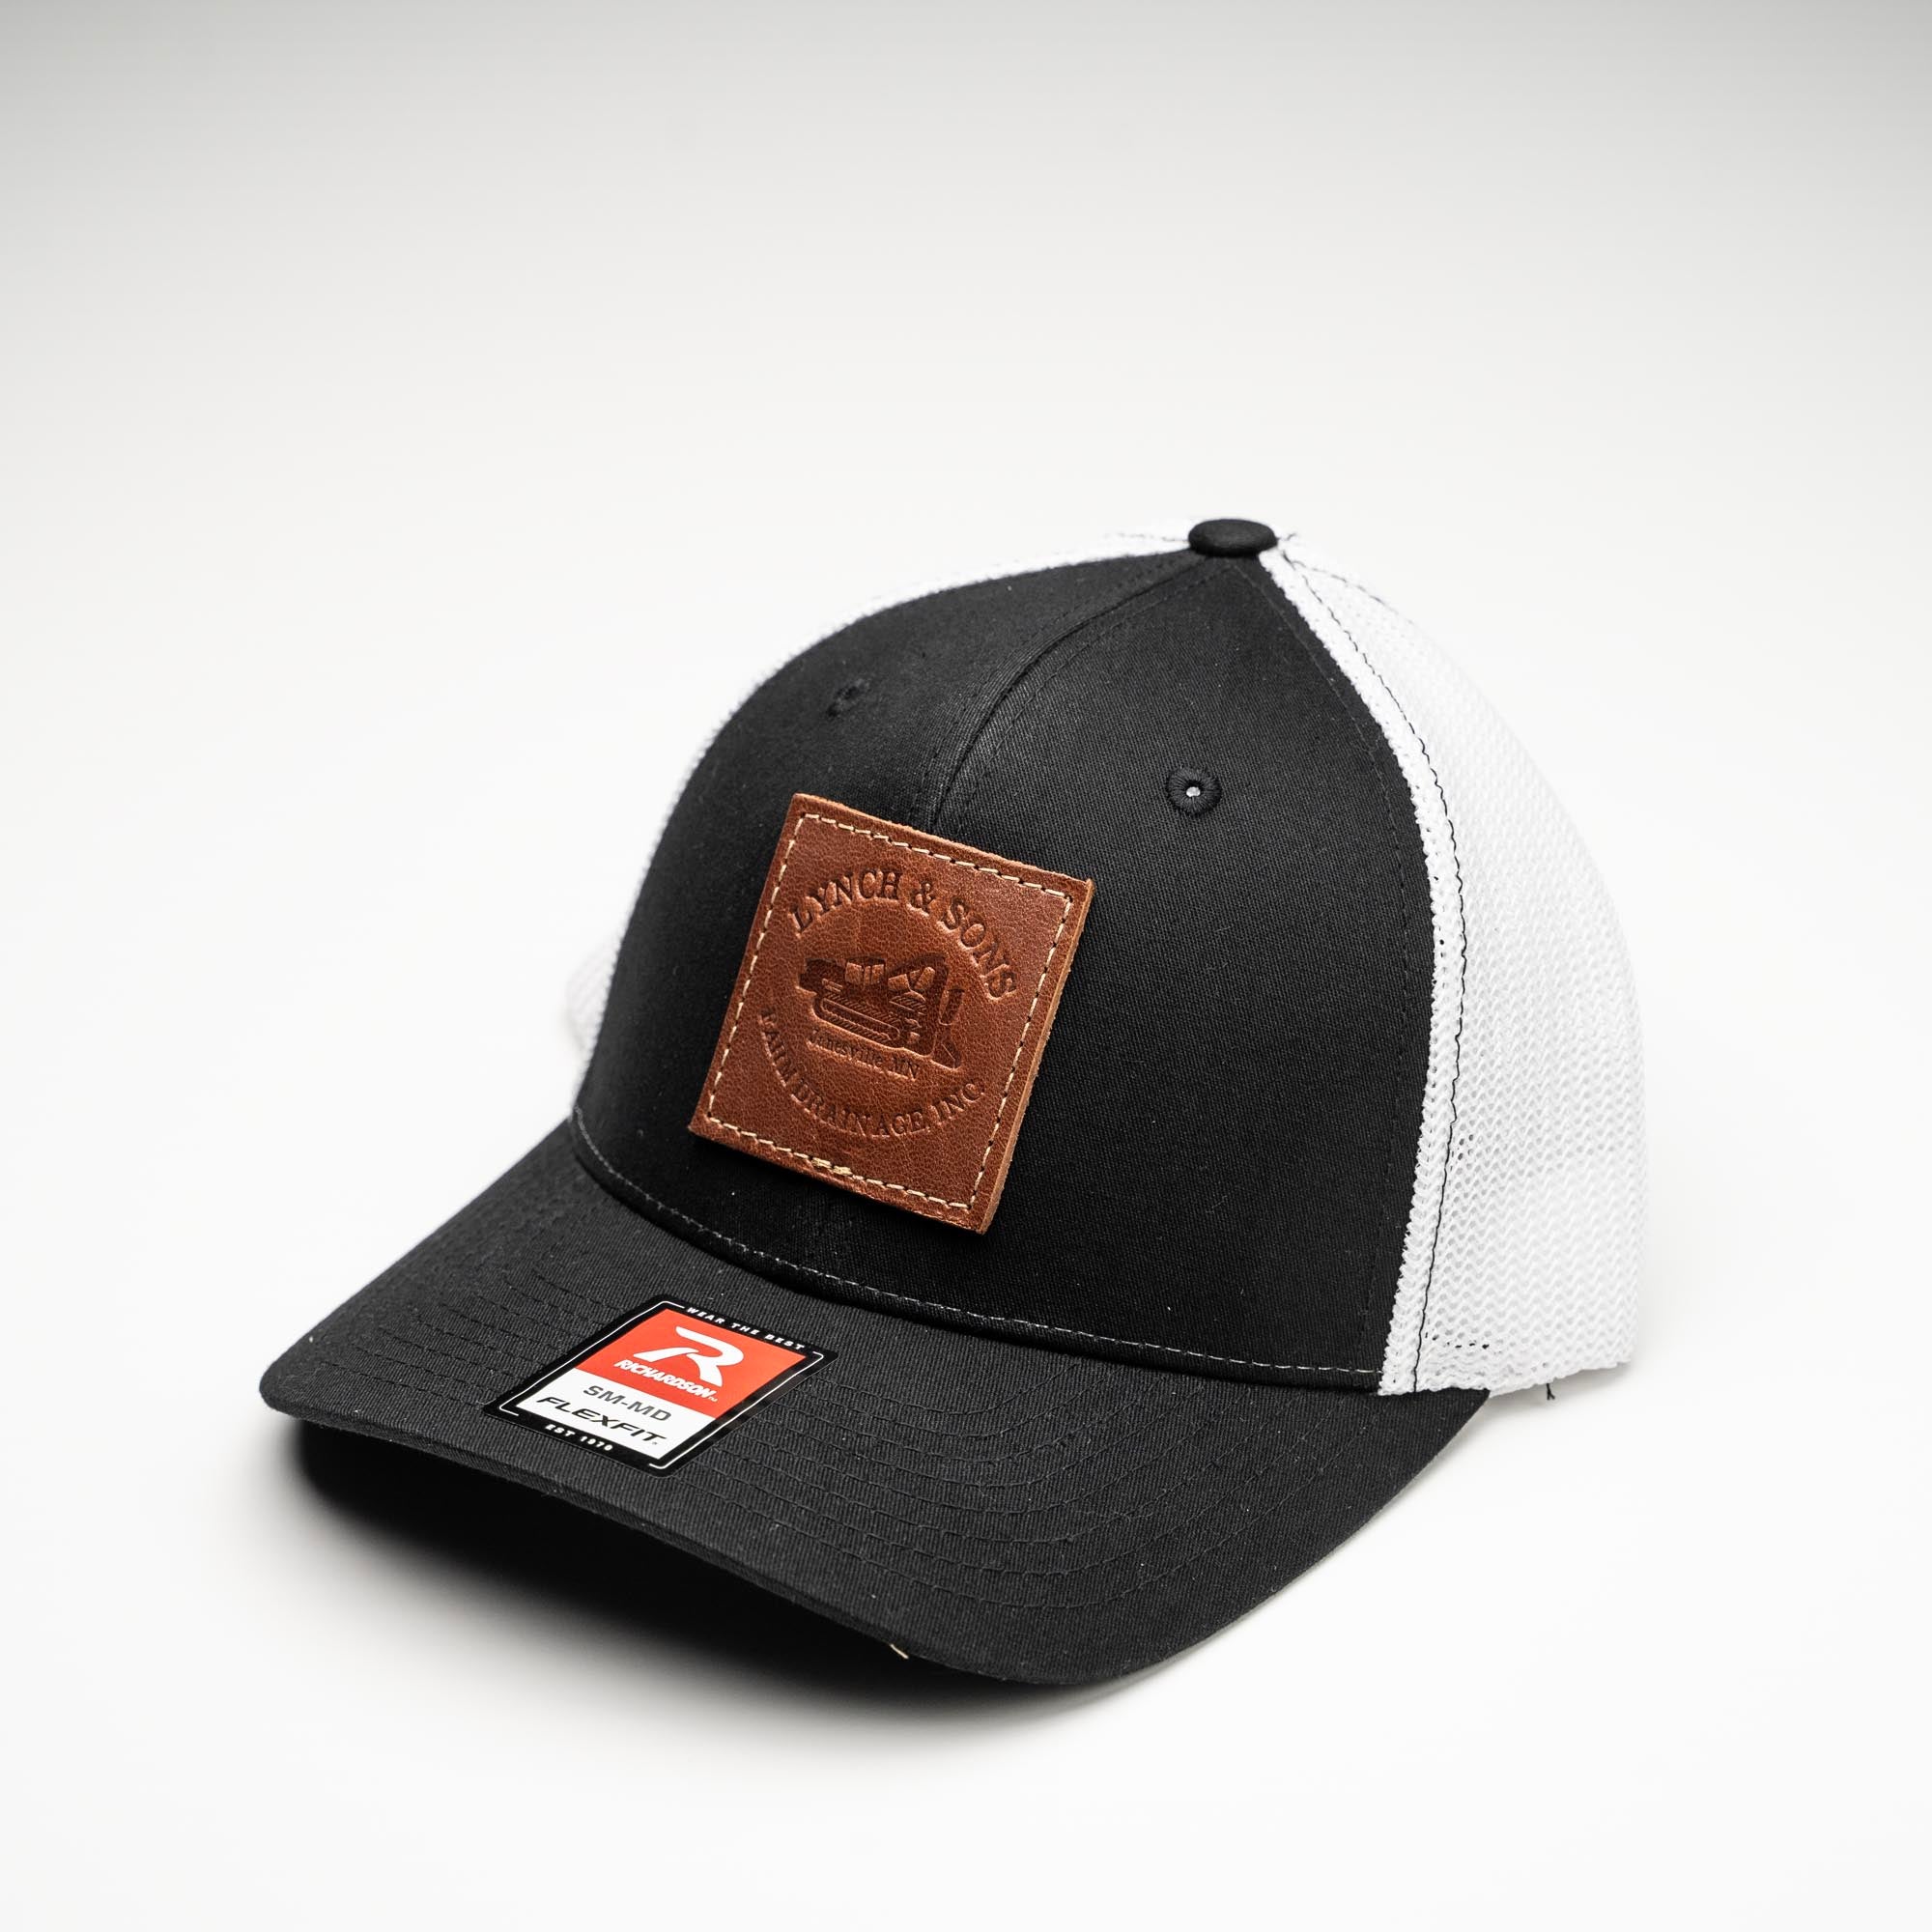 Debossed Leather Patch Trucker Hat ~ Richardson 110 R-Flex Trucker Hat ~ Customized with YOUR LOGO